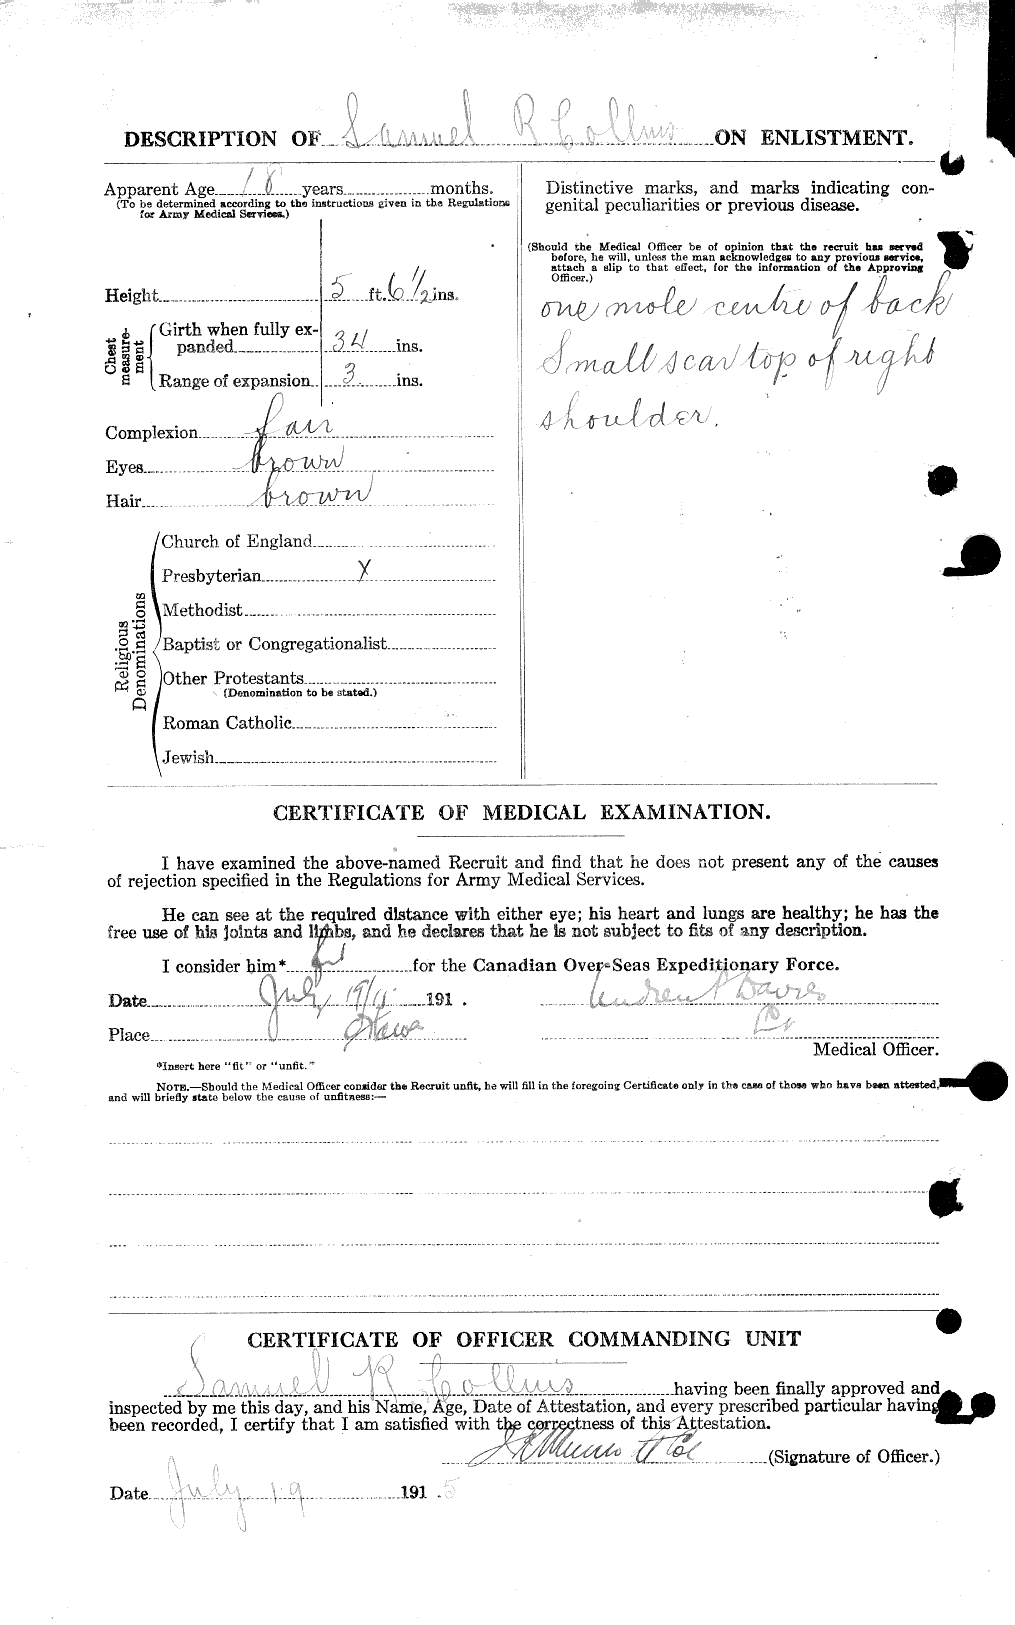 Personnel Records of the First World War - CEF 034540b